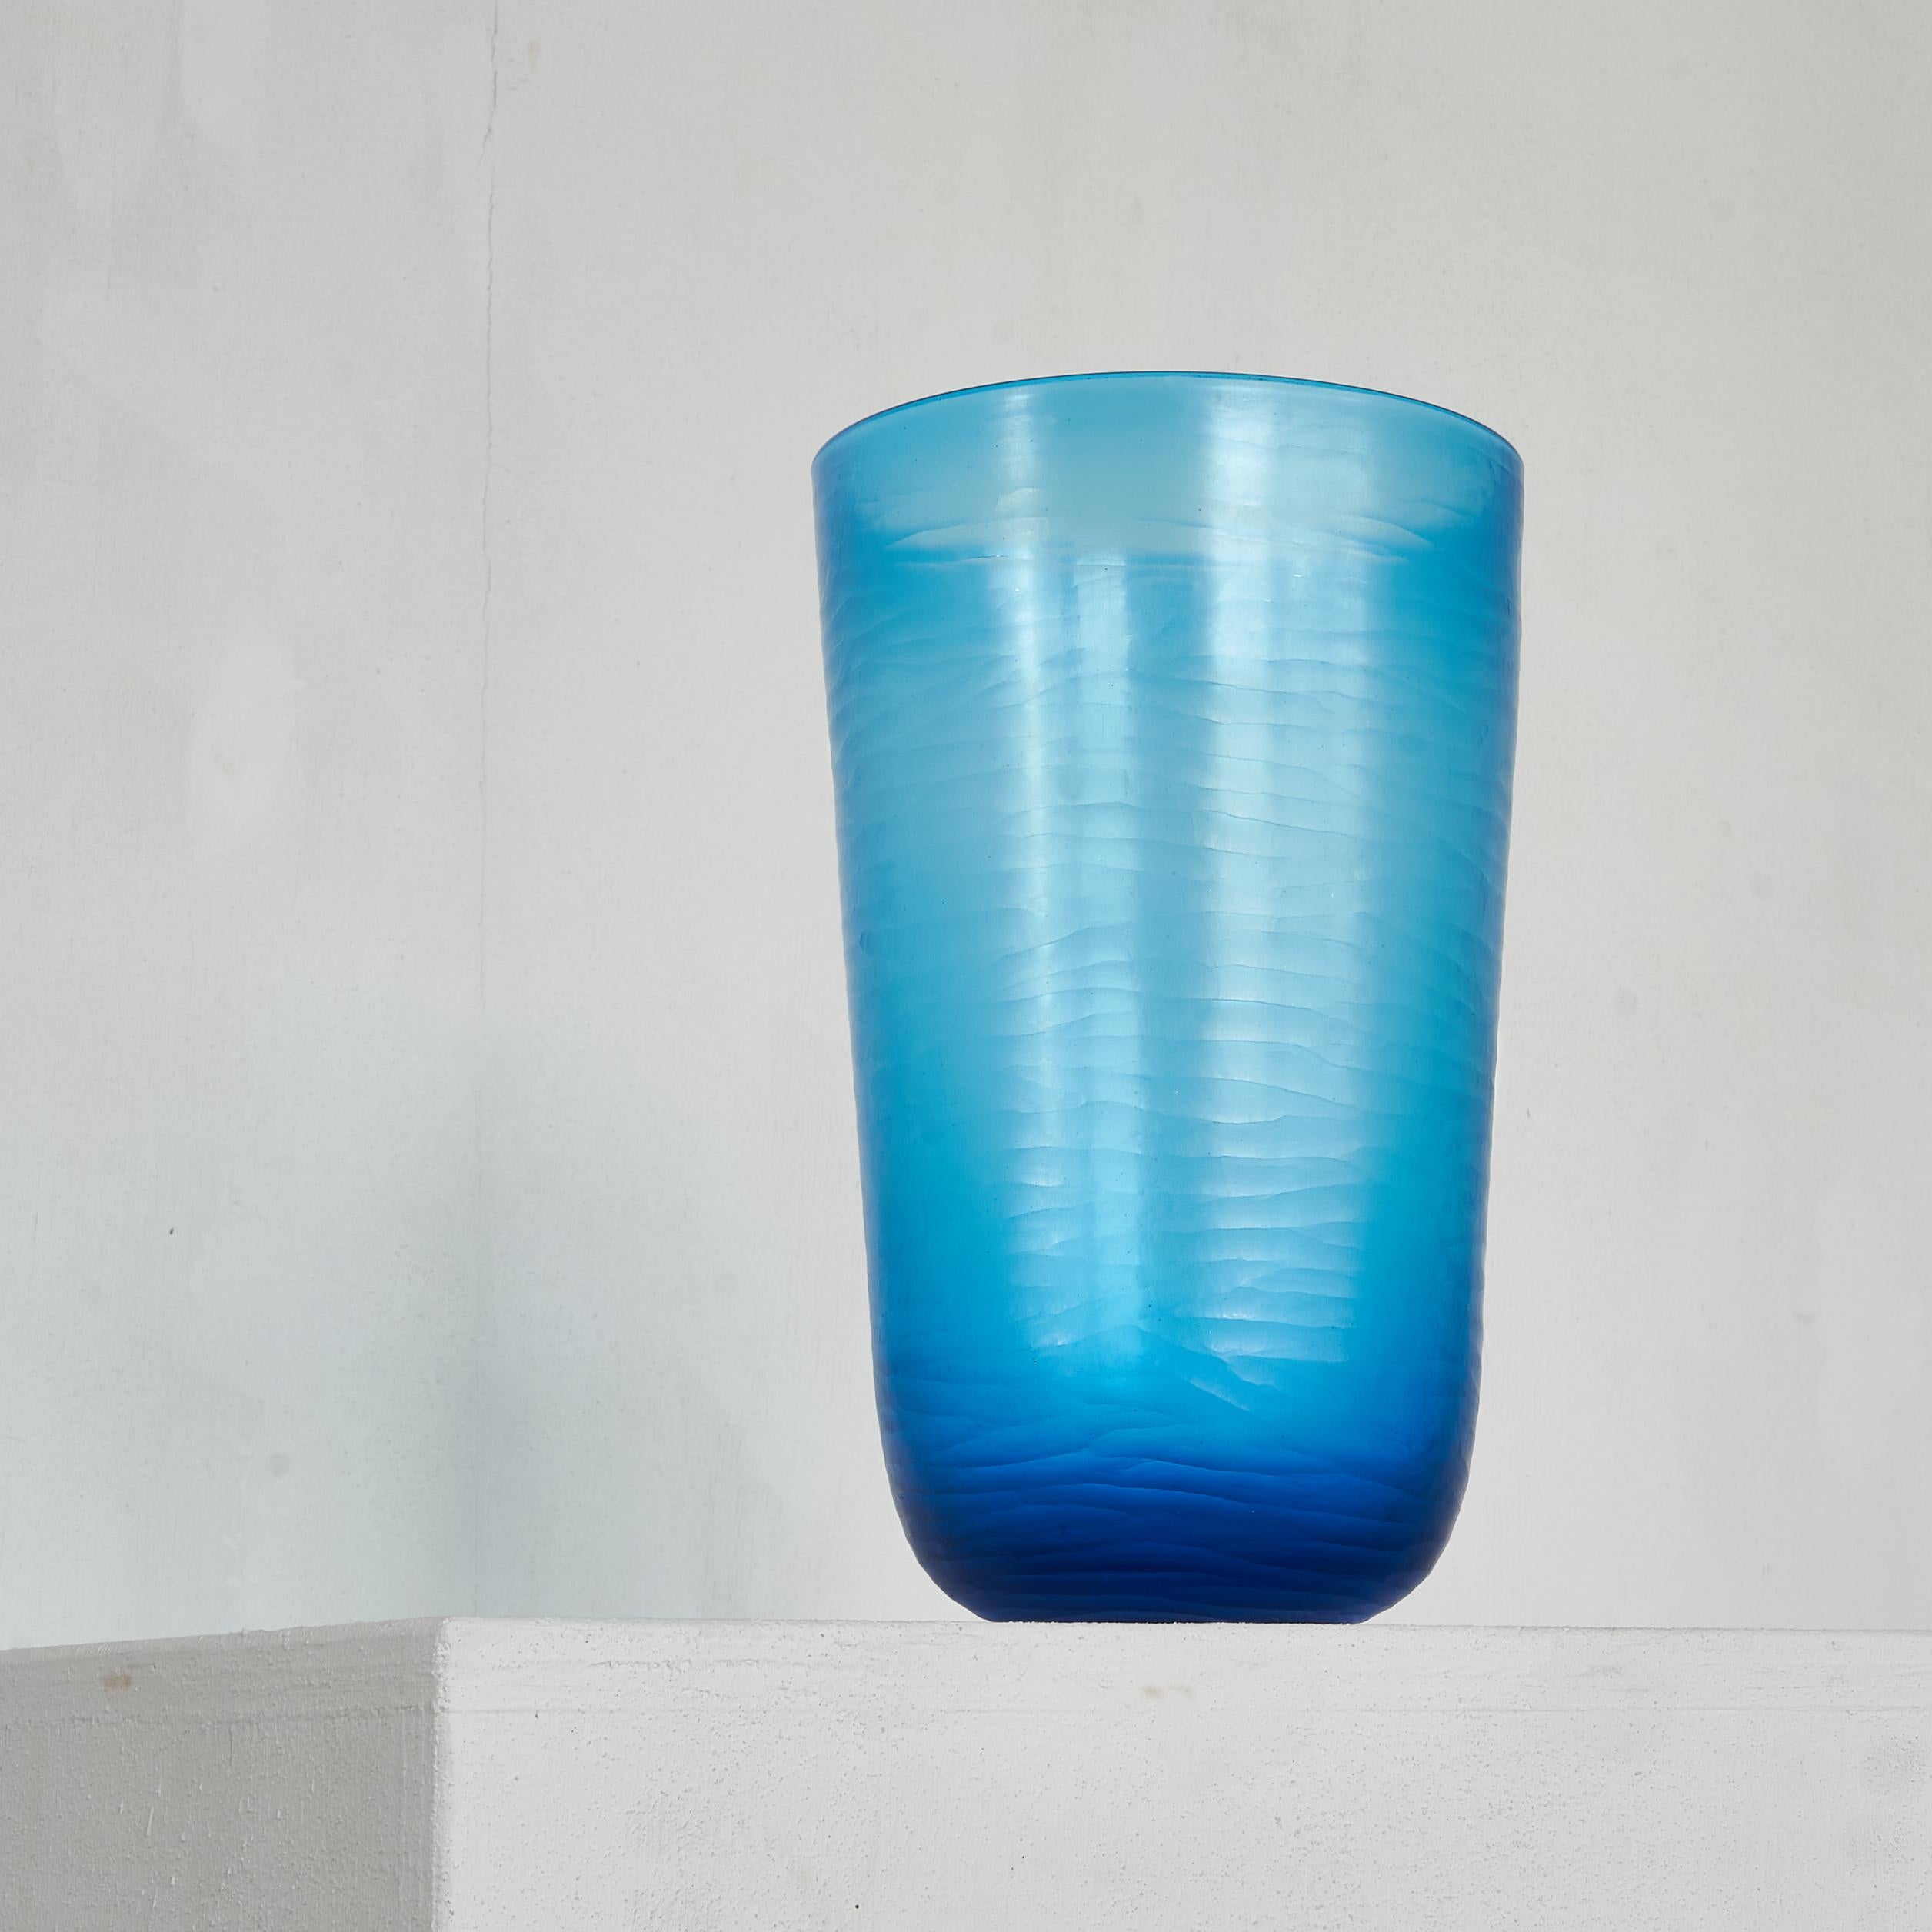 Fantastic and large mid-century vase by renowned Murano and London glass house Salviati. As one of the oldest Murano glass houses in Venice Salviati has proved to be one of the most prestigious makes of glass art. Salviati glass works and mosaics